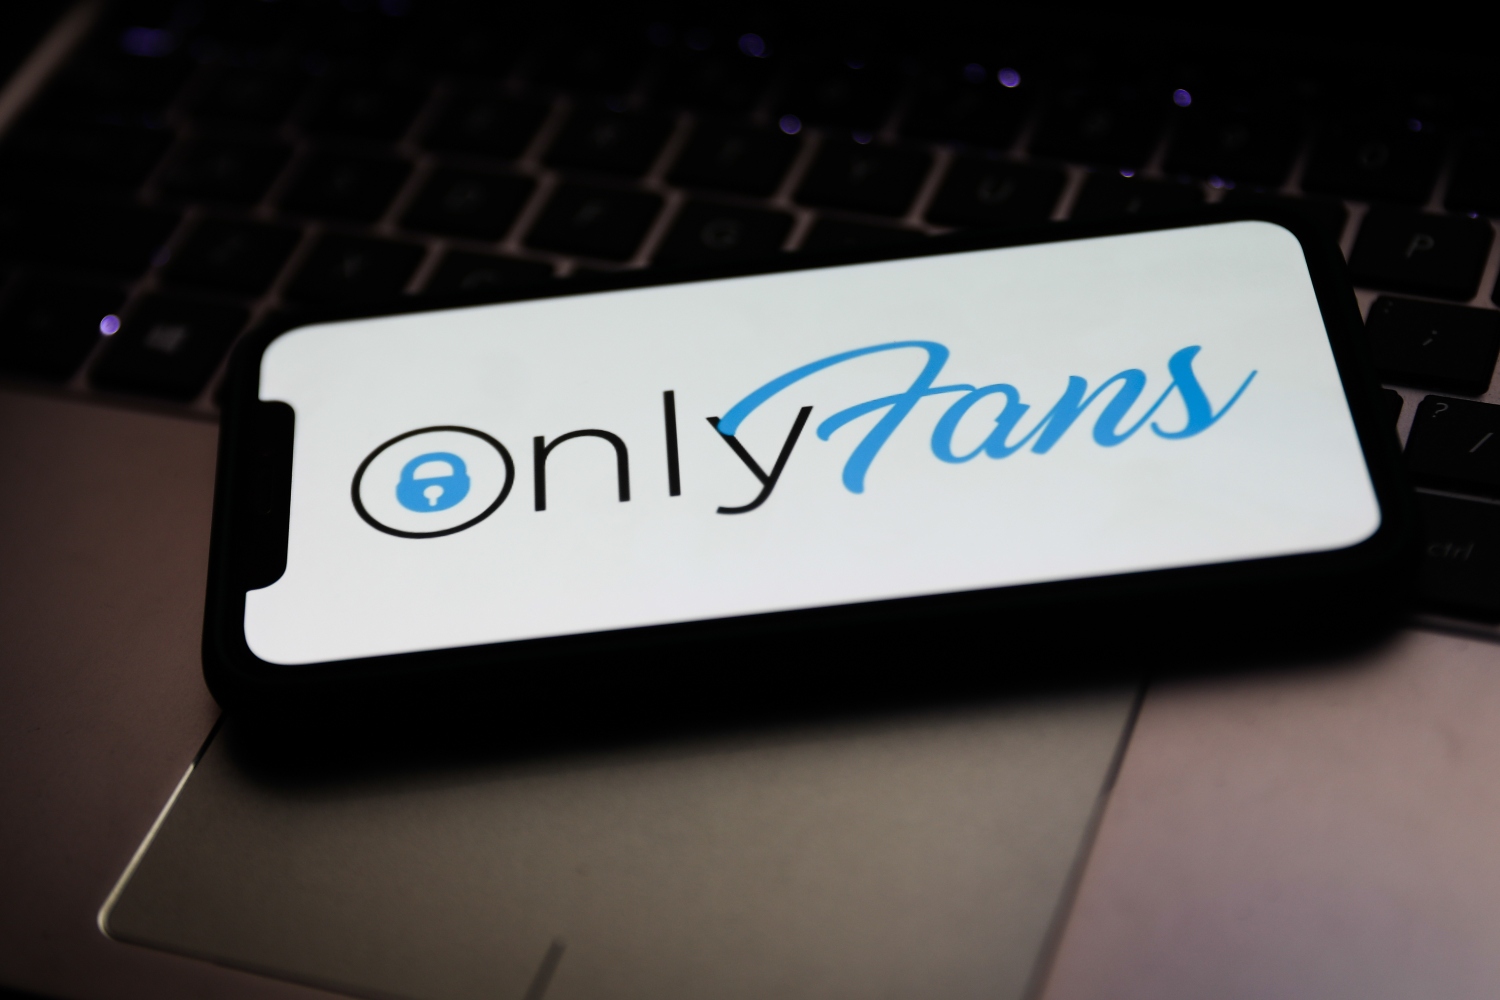 OnlyFans logo displayed on iPhone screen